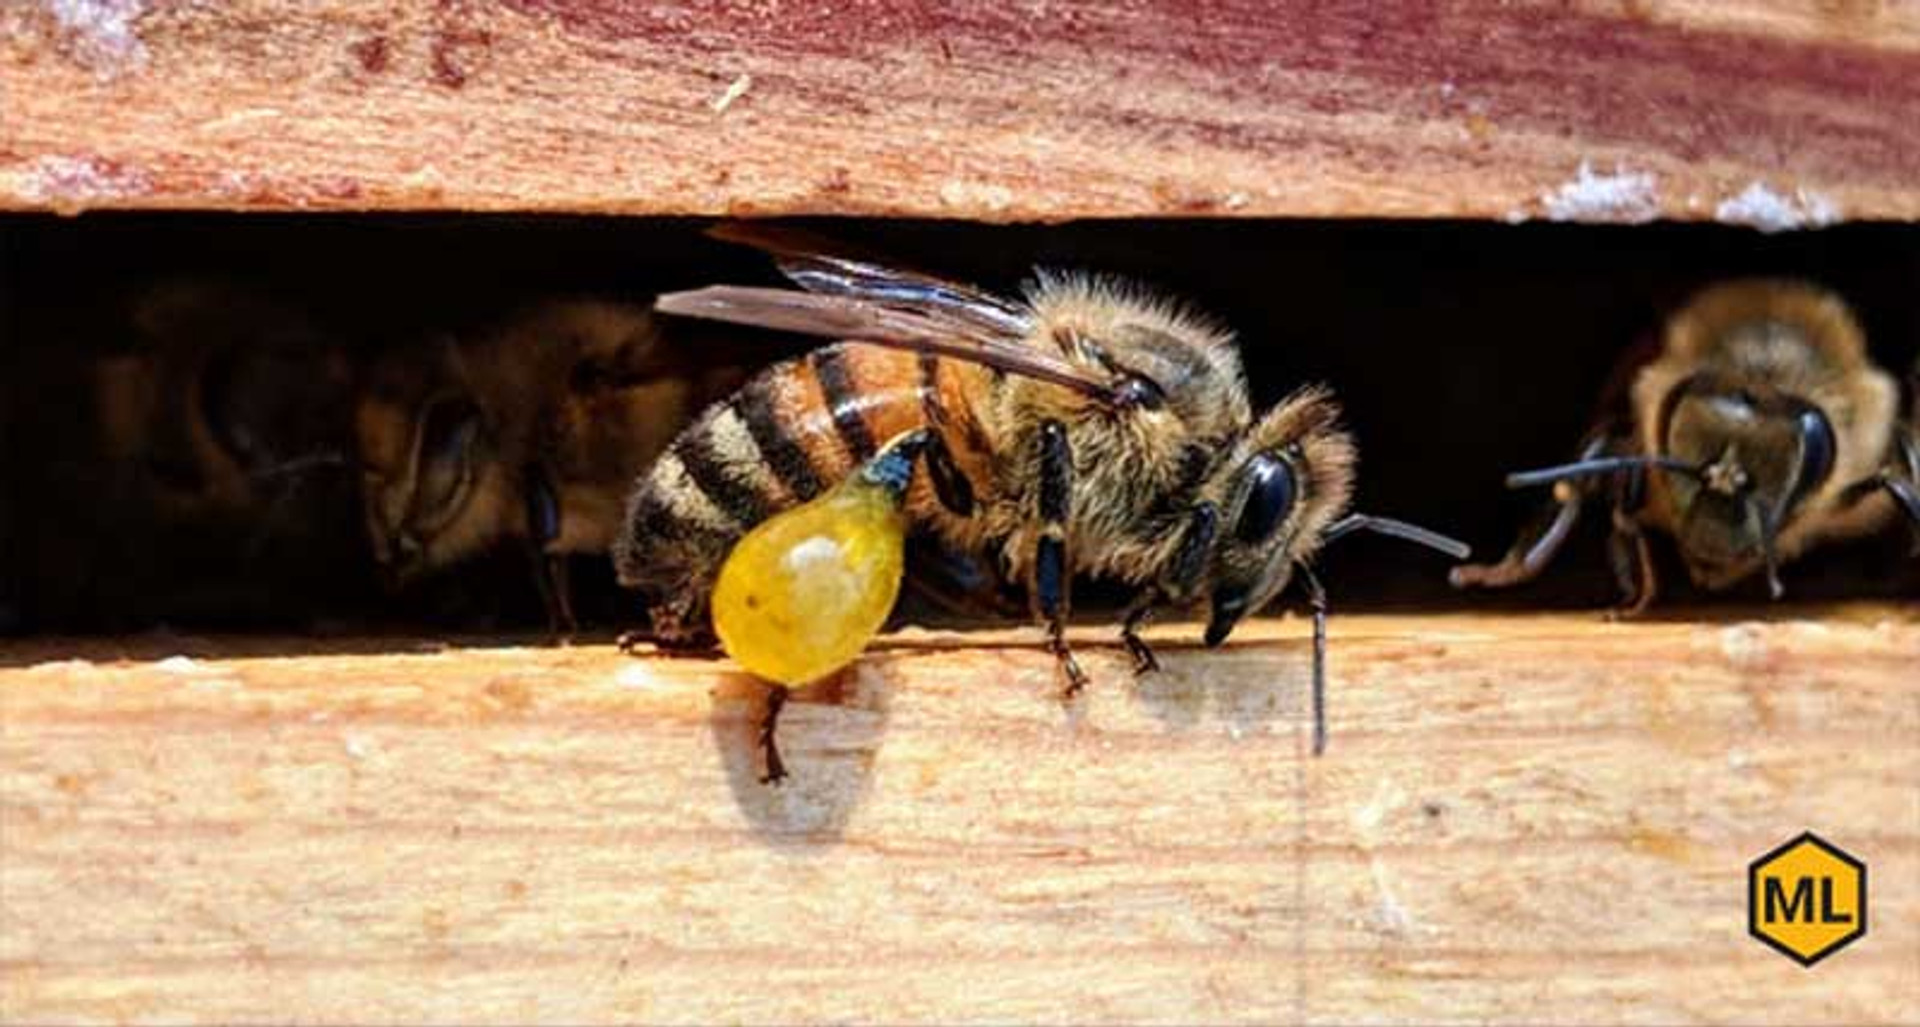 Where Did Our Honey Bees Go To?